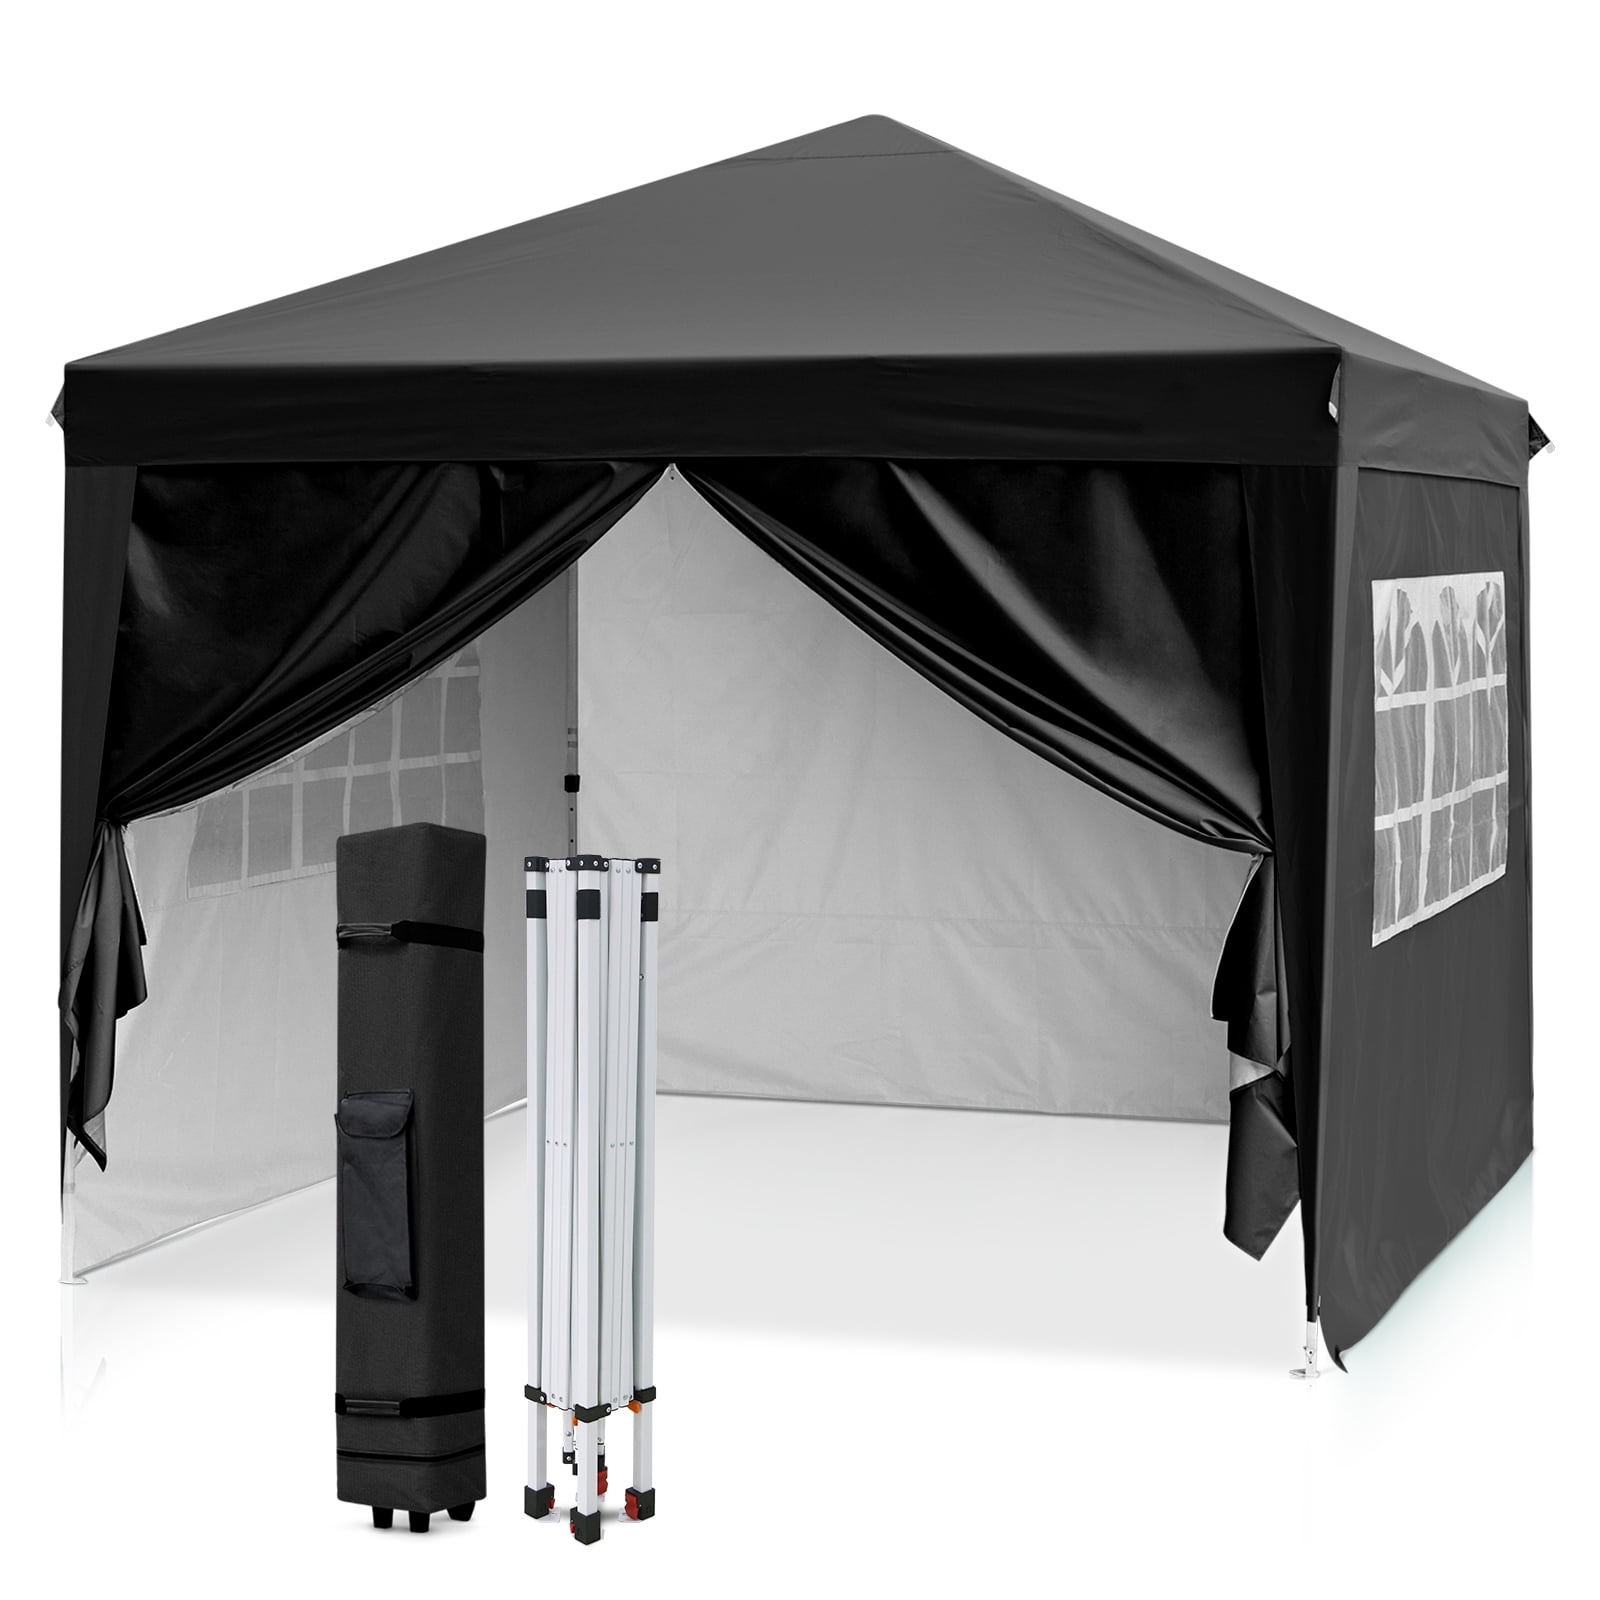 EAGLE PEAK 10 10 Pop Up Canopy Tent with 4 Side Walls, Easy Set up with 100 Square Shade - Walmart.com